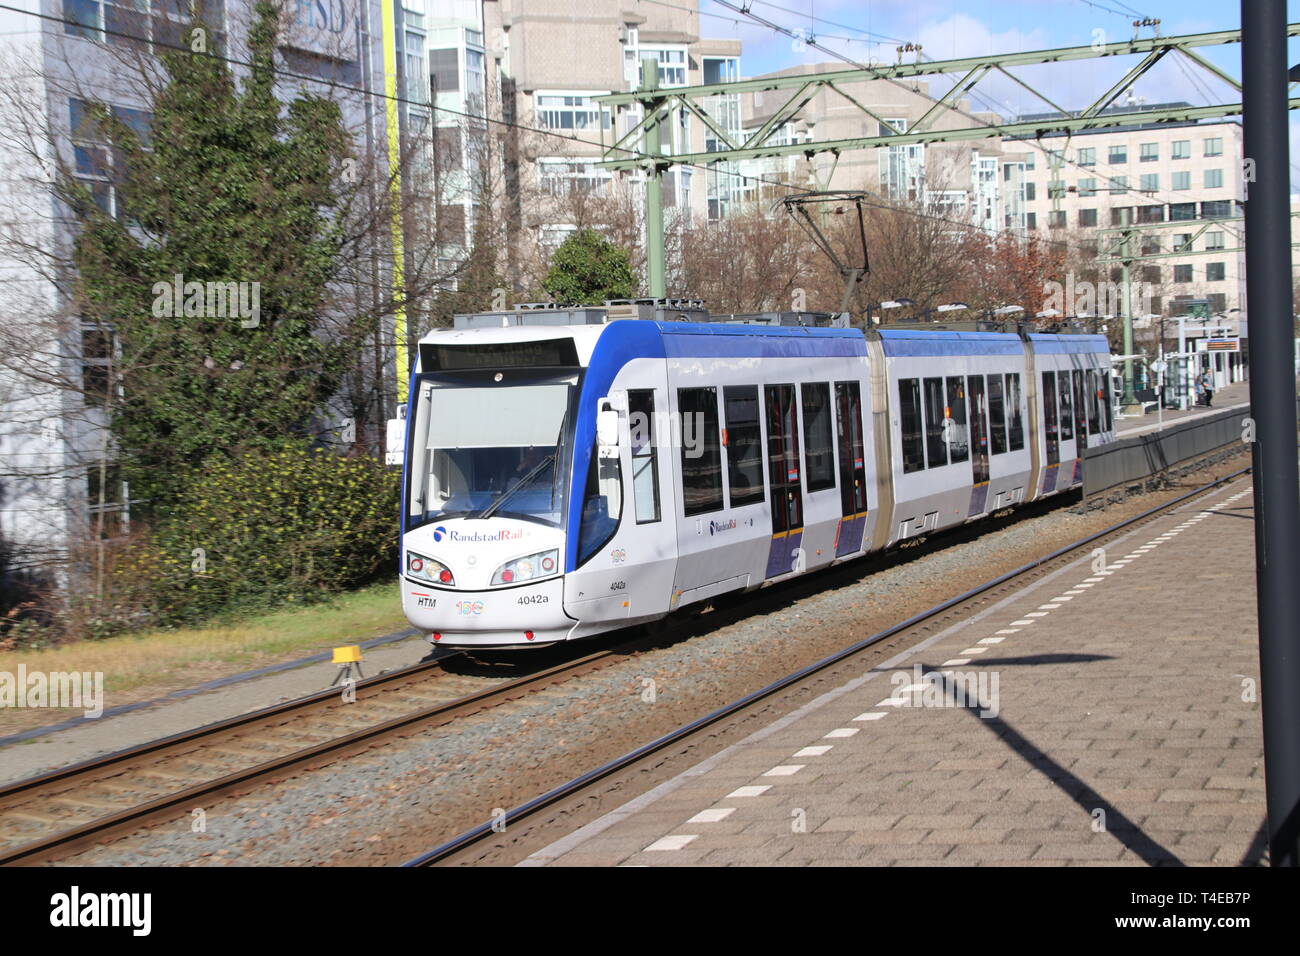 Regio Citads tram vehicle on the rails for Randstadrail in The Hague operated by HTM at station Den Haag Laan van Noi Stock Photo